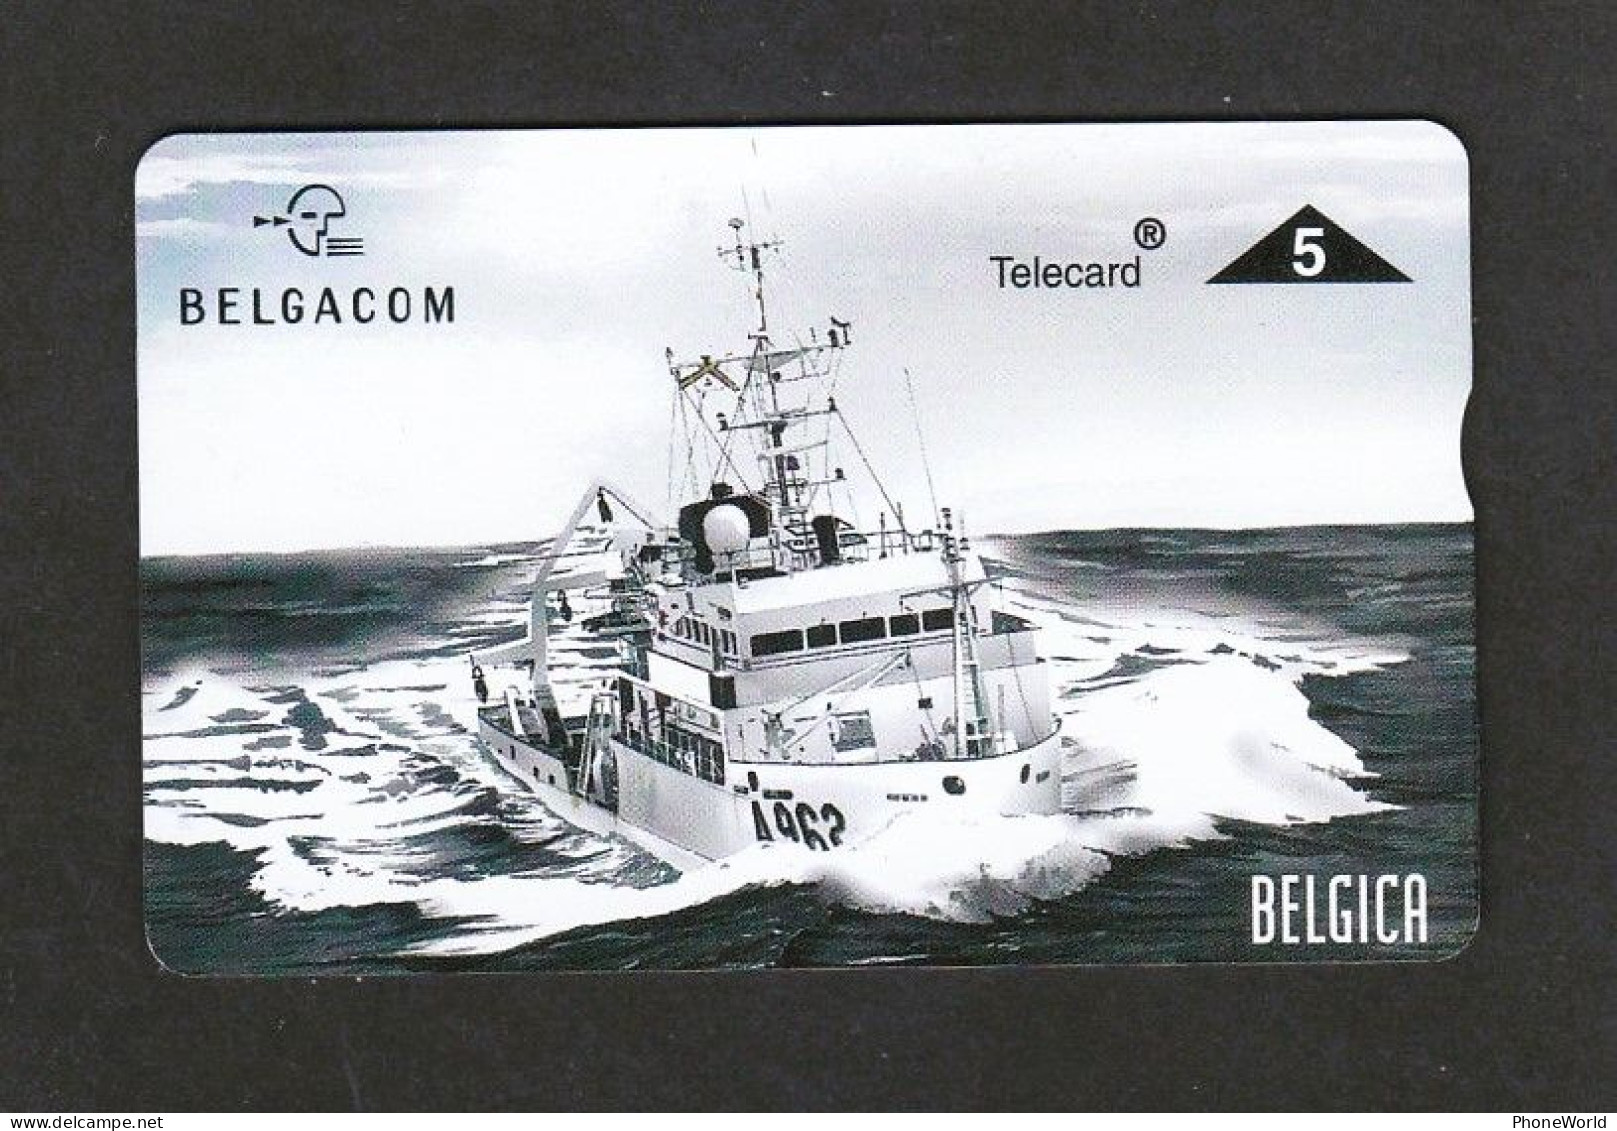 Belgacom, P551 - Belgica 2 - 706 L Mint - Ship - Army - Without Chip